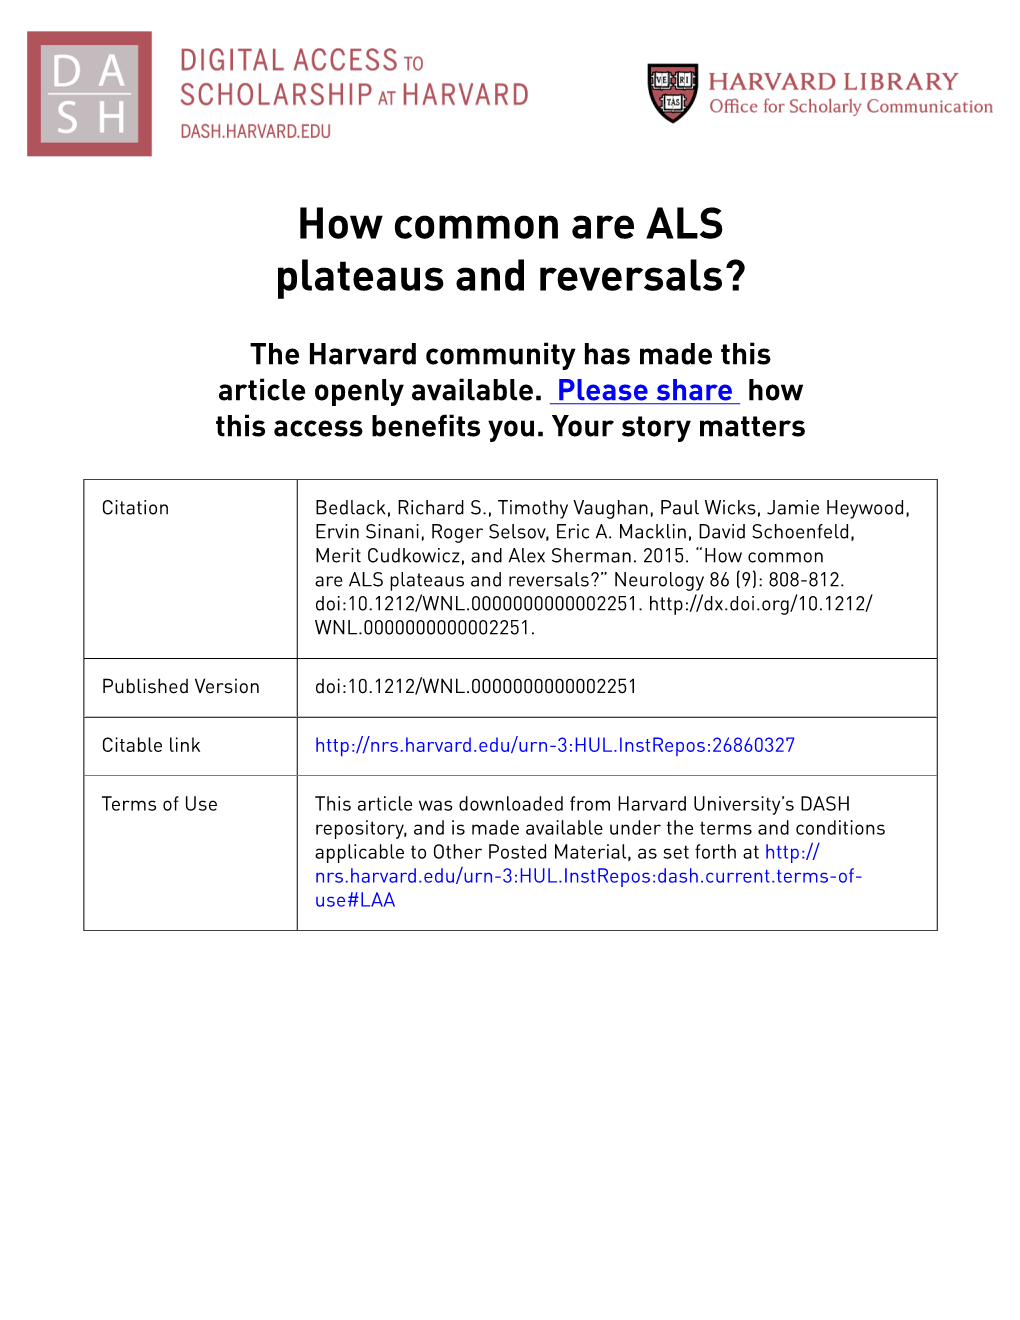 How Common Are ALS Plateaus and Reversals?